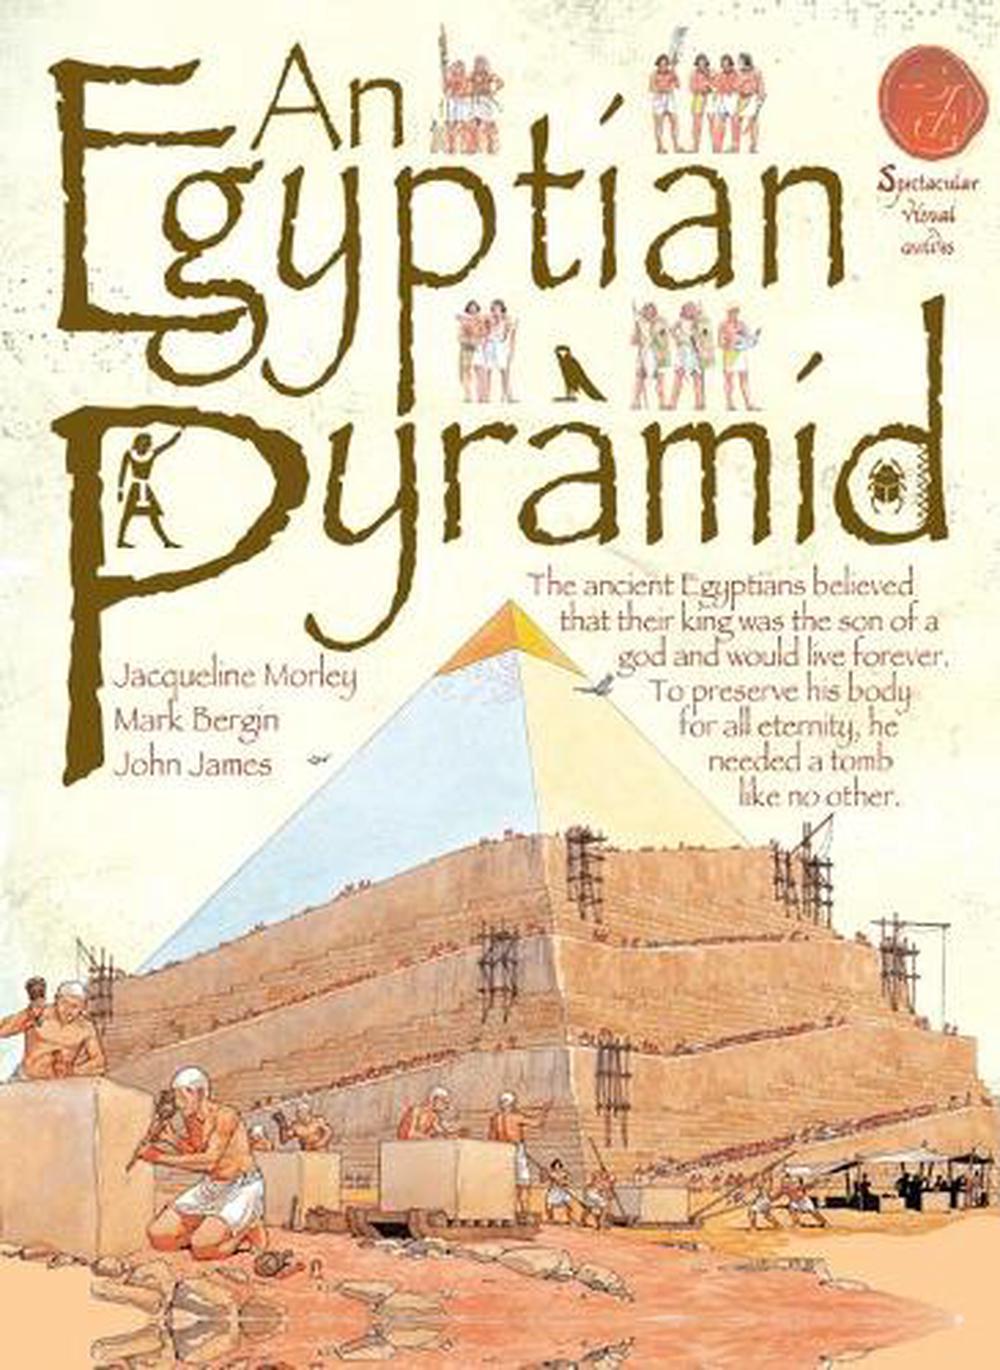 egyptian-pyramid-by-jacqueline-morley-english-paperback-book-free